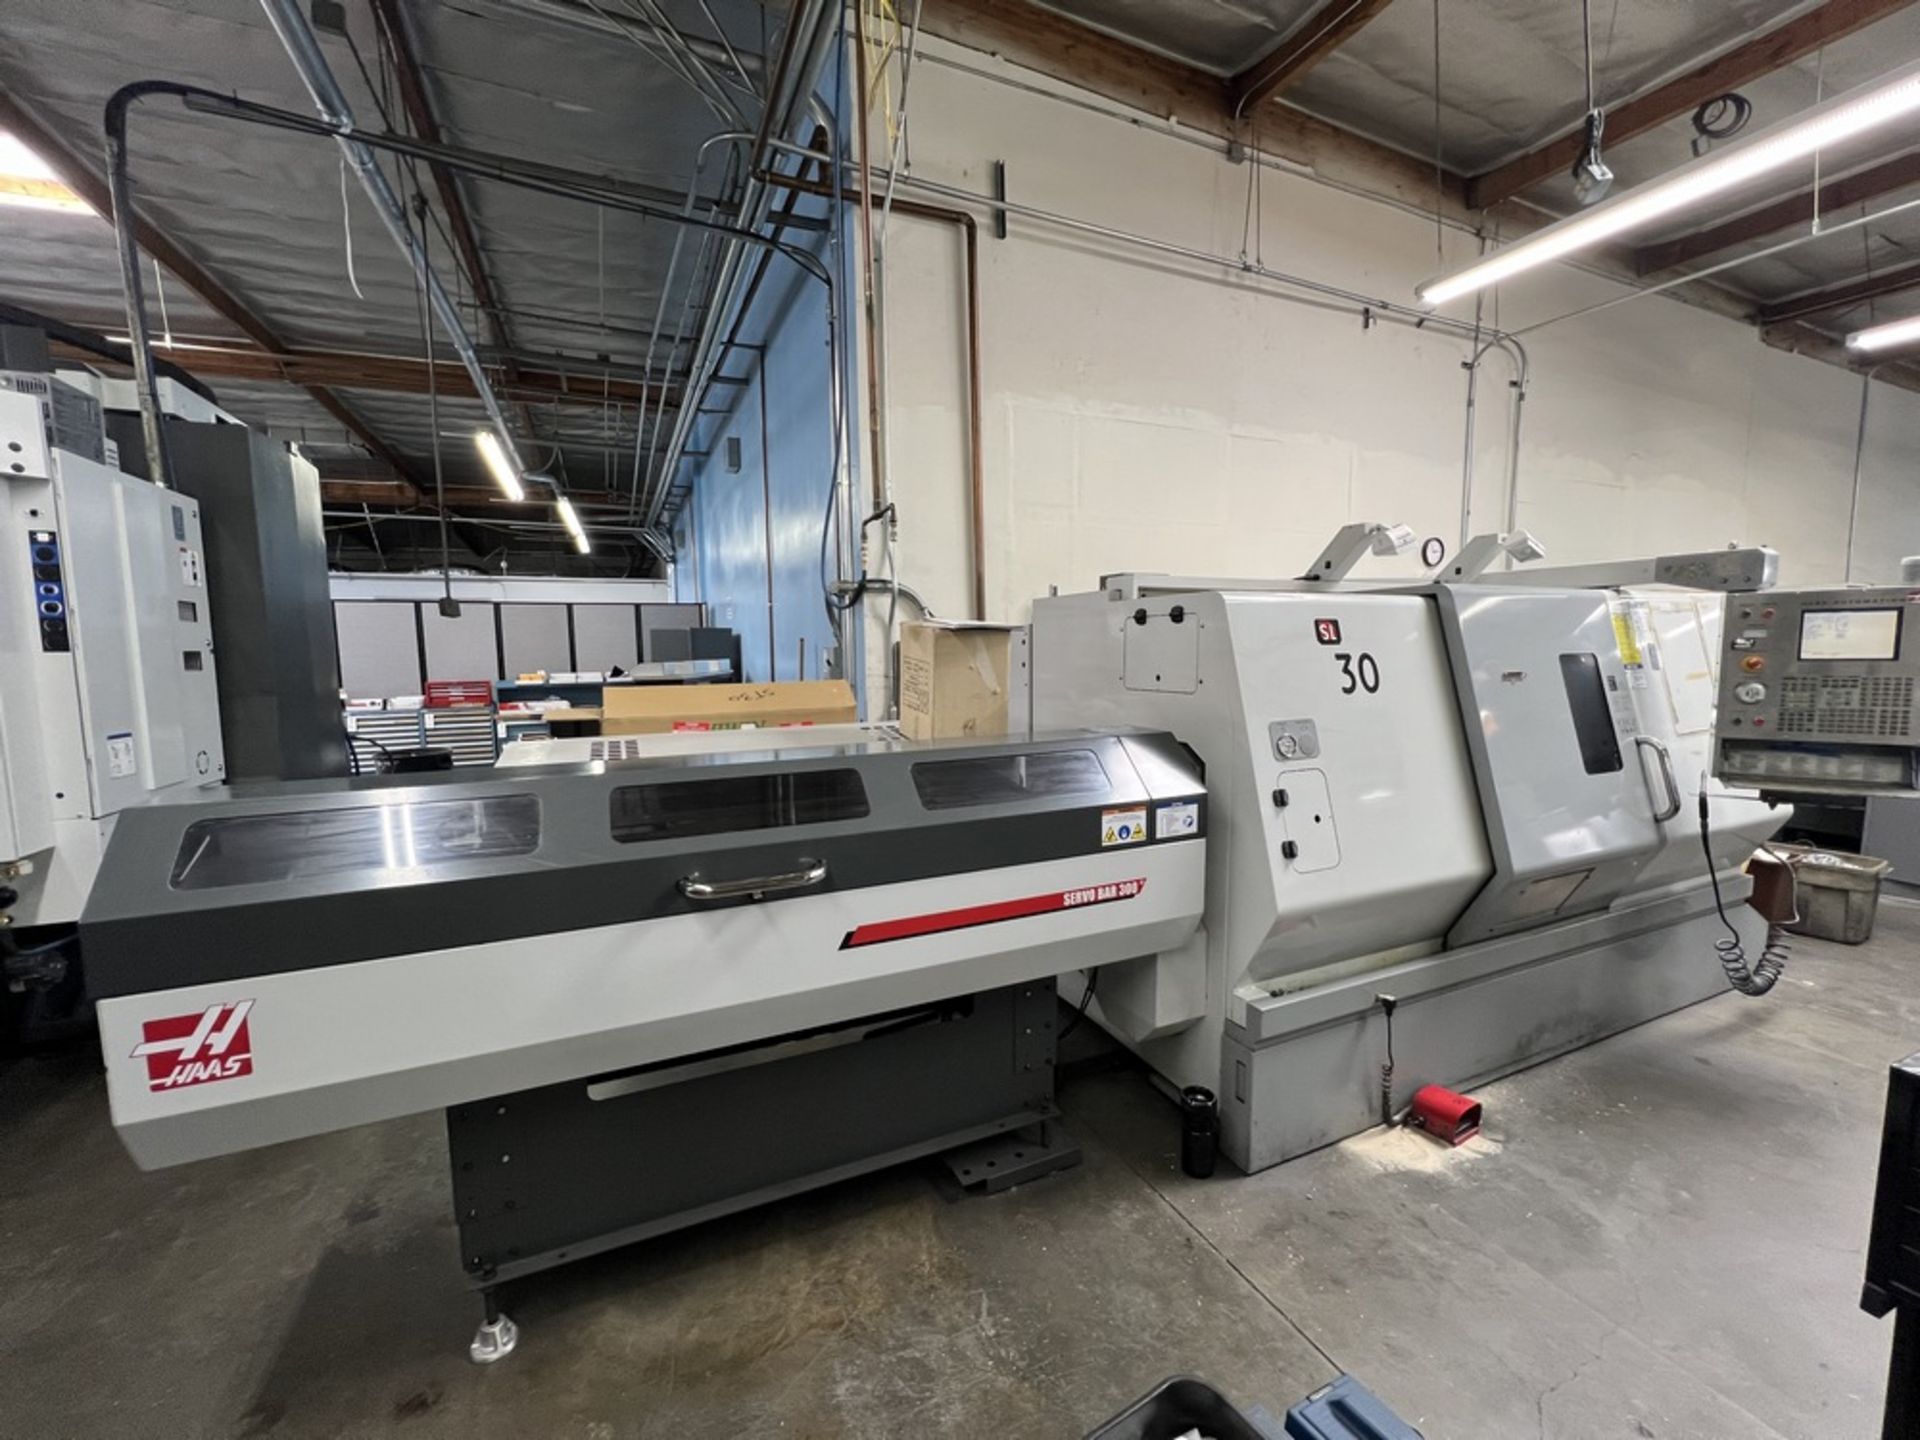 2006 Haas SL-30, CNC Lathe, Live Milling, 12 Station Turret, 10" 3 Jaw Chuck Tool Presetter, Chip